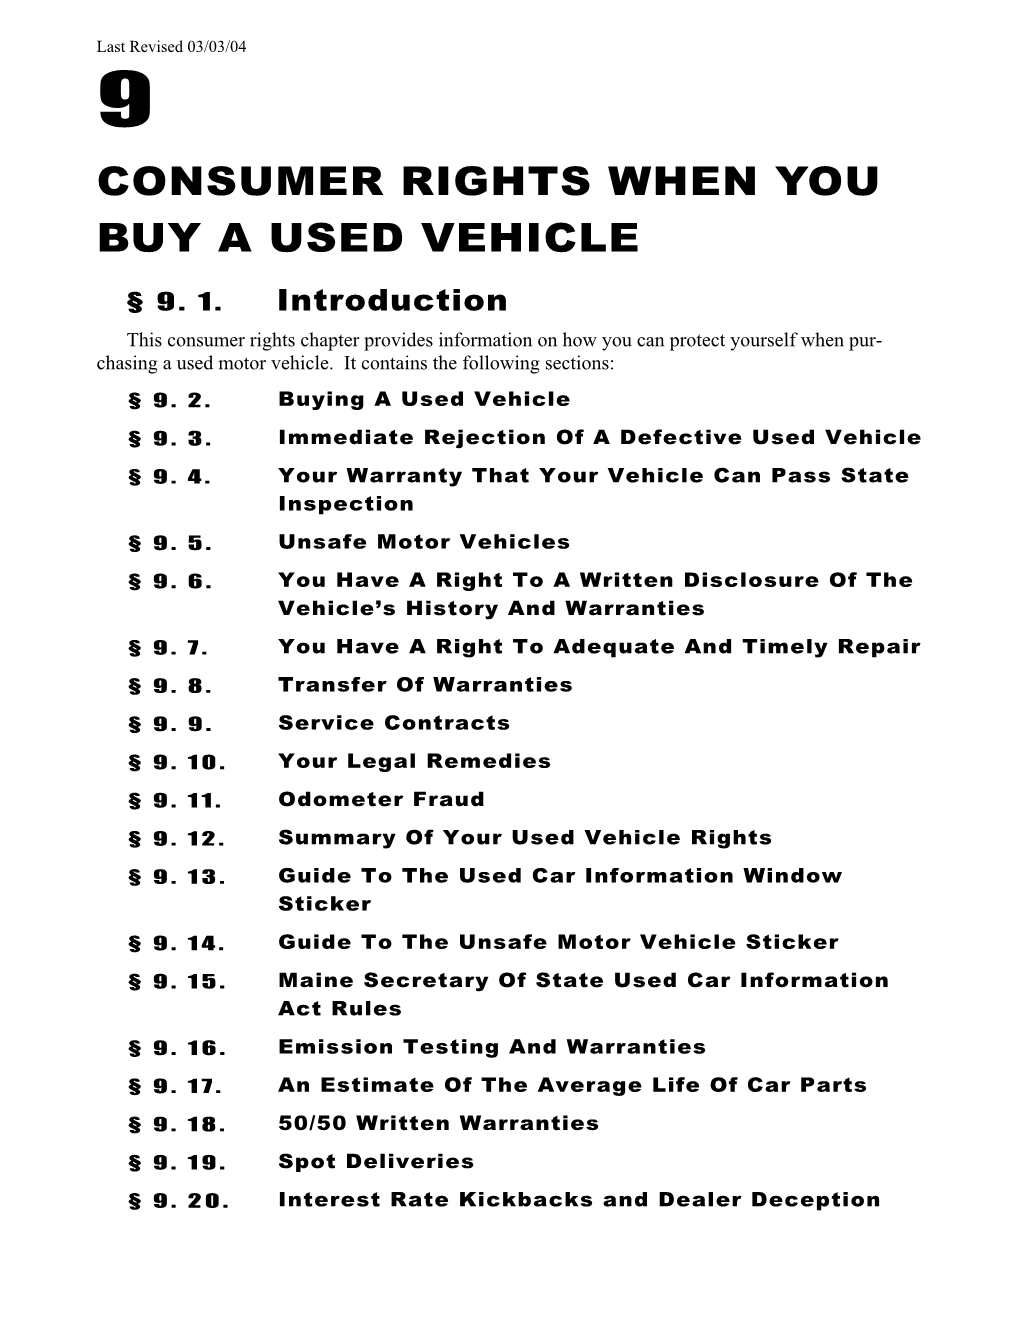 Consumer Rights When You Buy a Used Vehicle